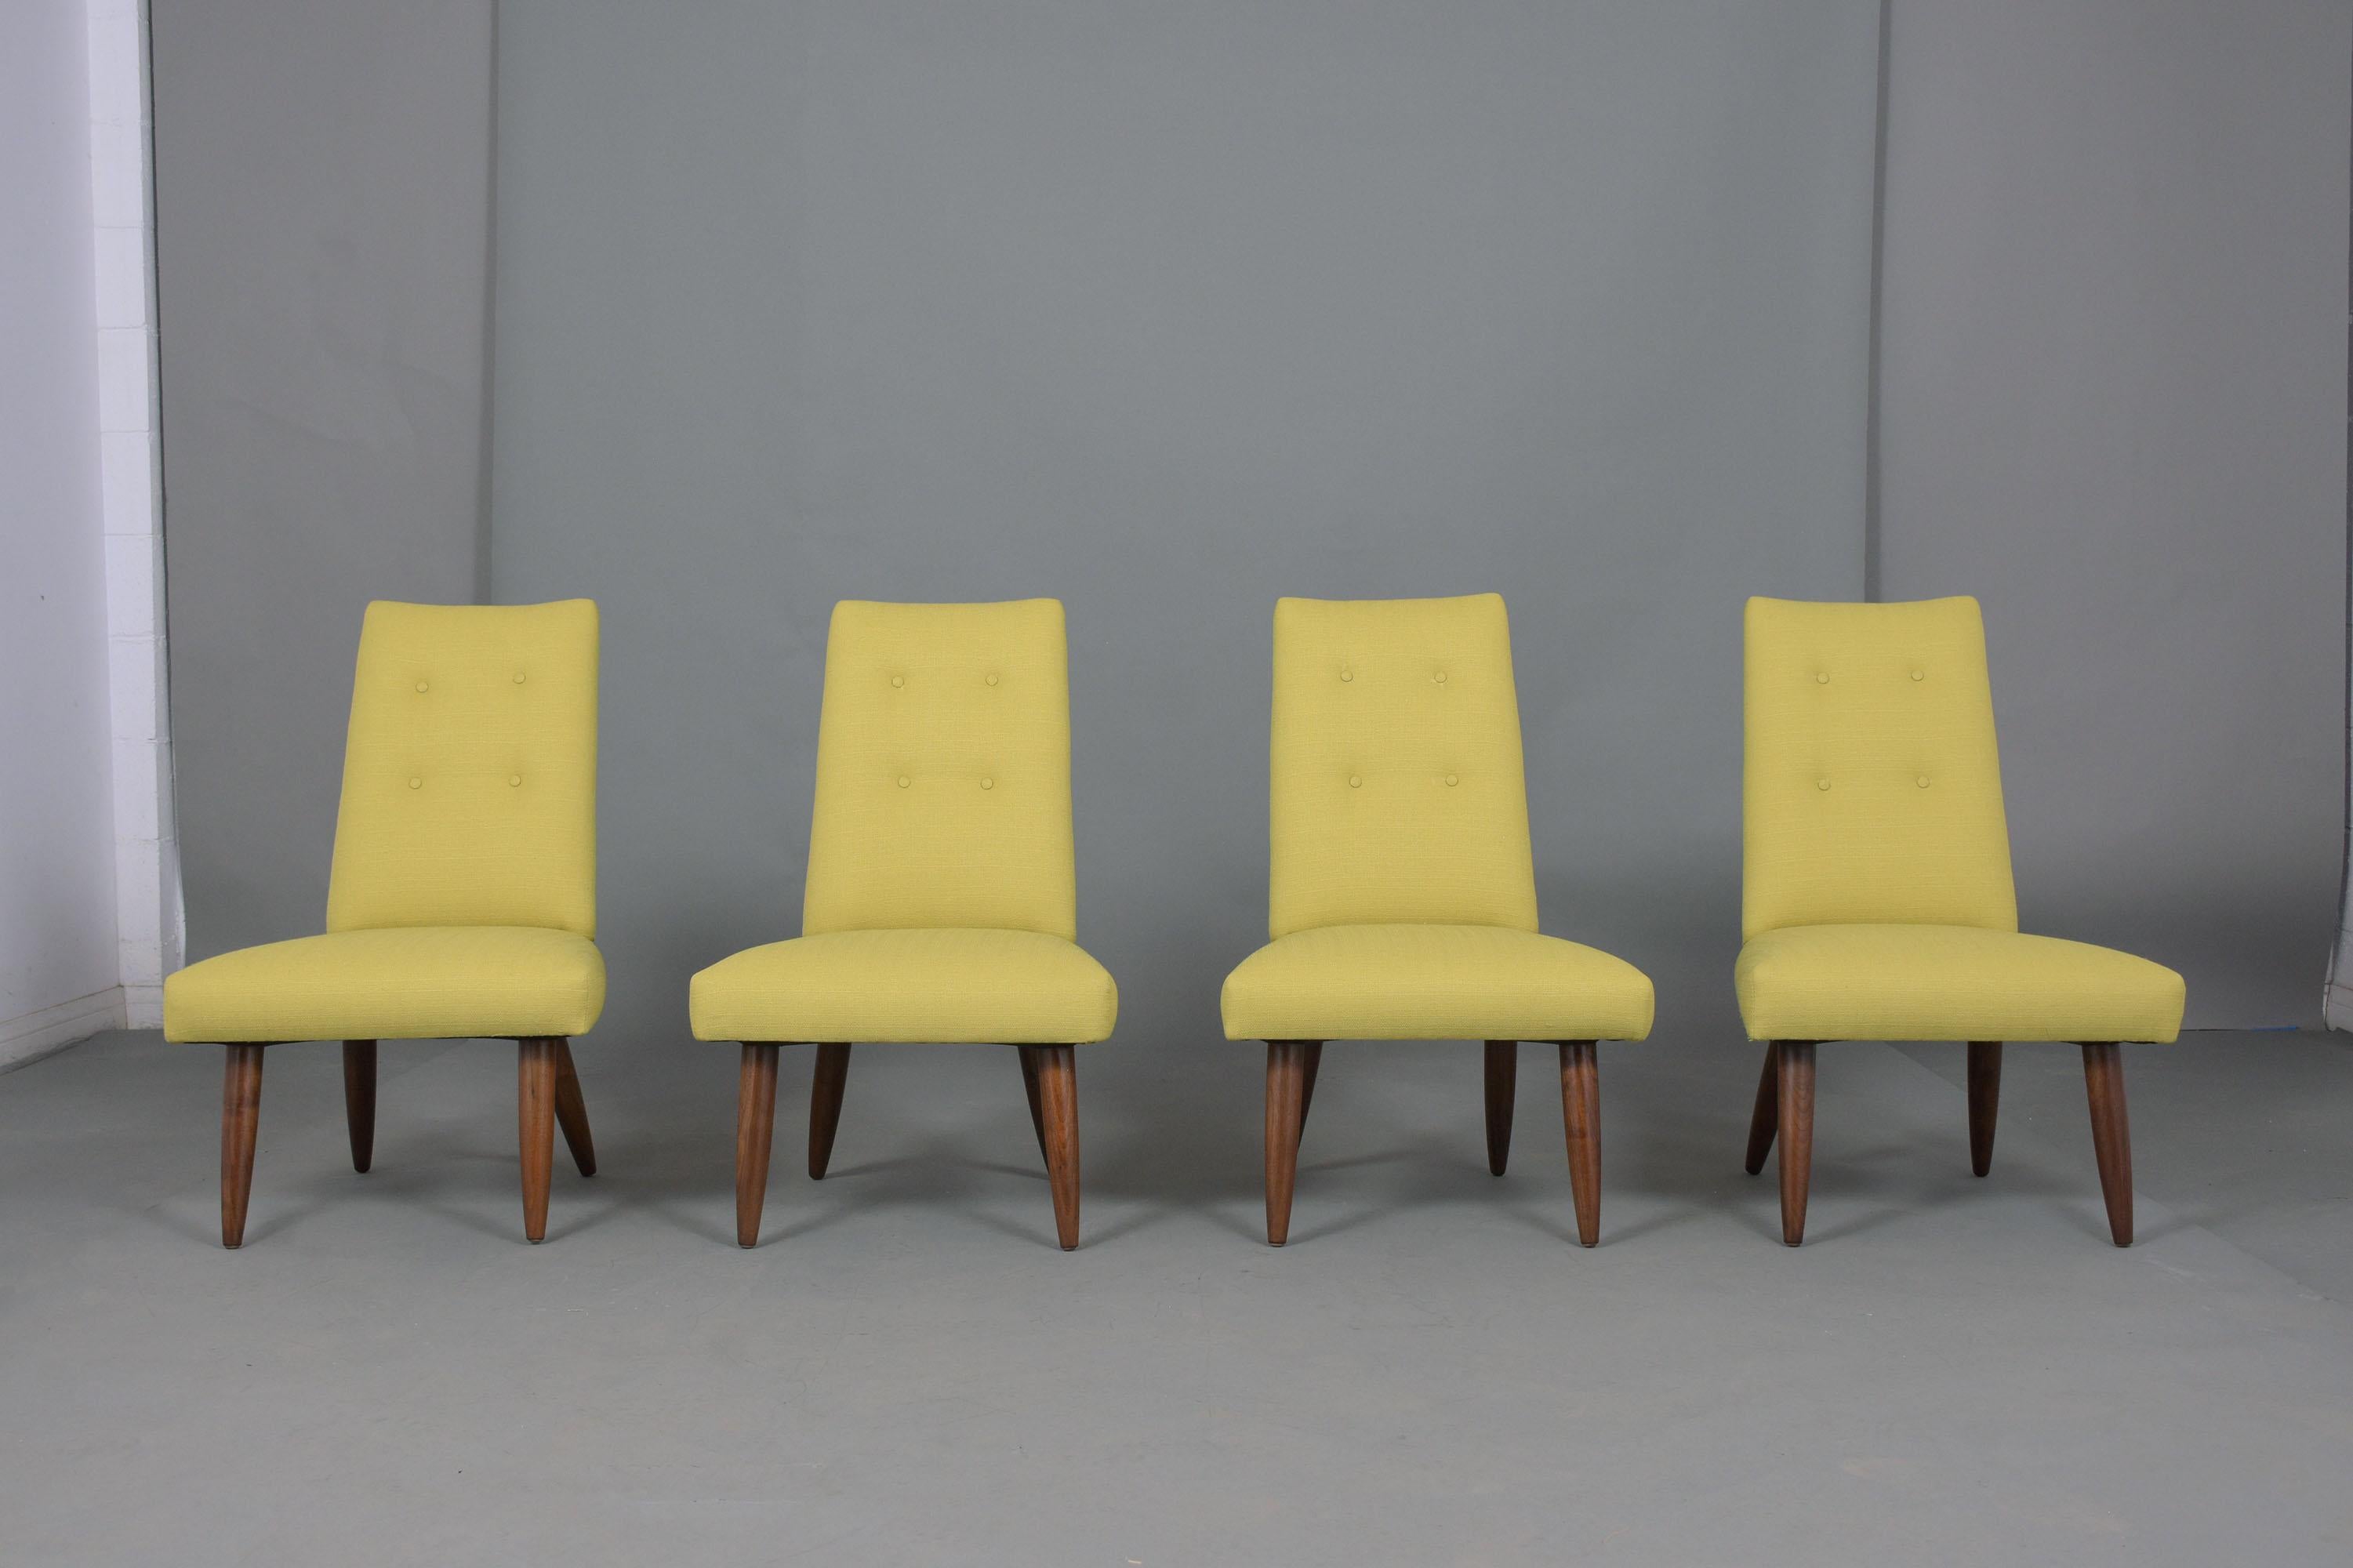 American Set of Four Danish Modern Upholstered Dining Chairs For Sale